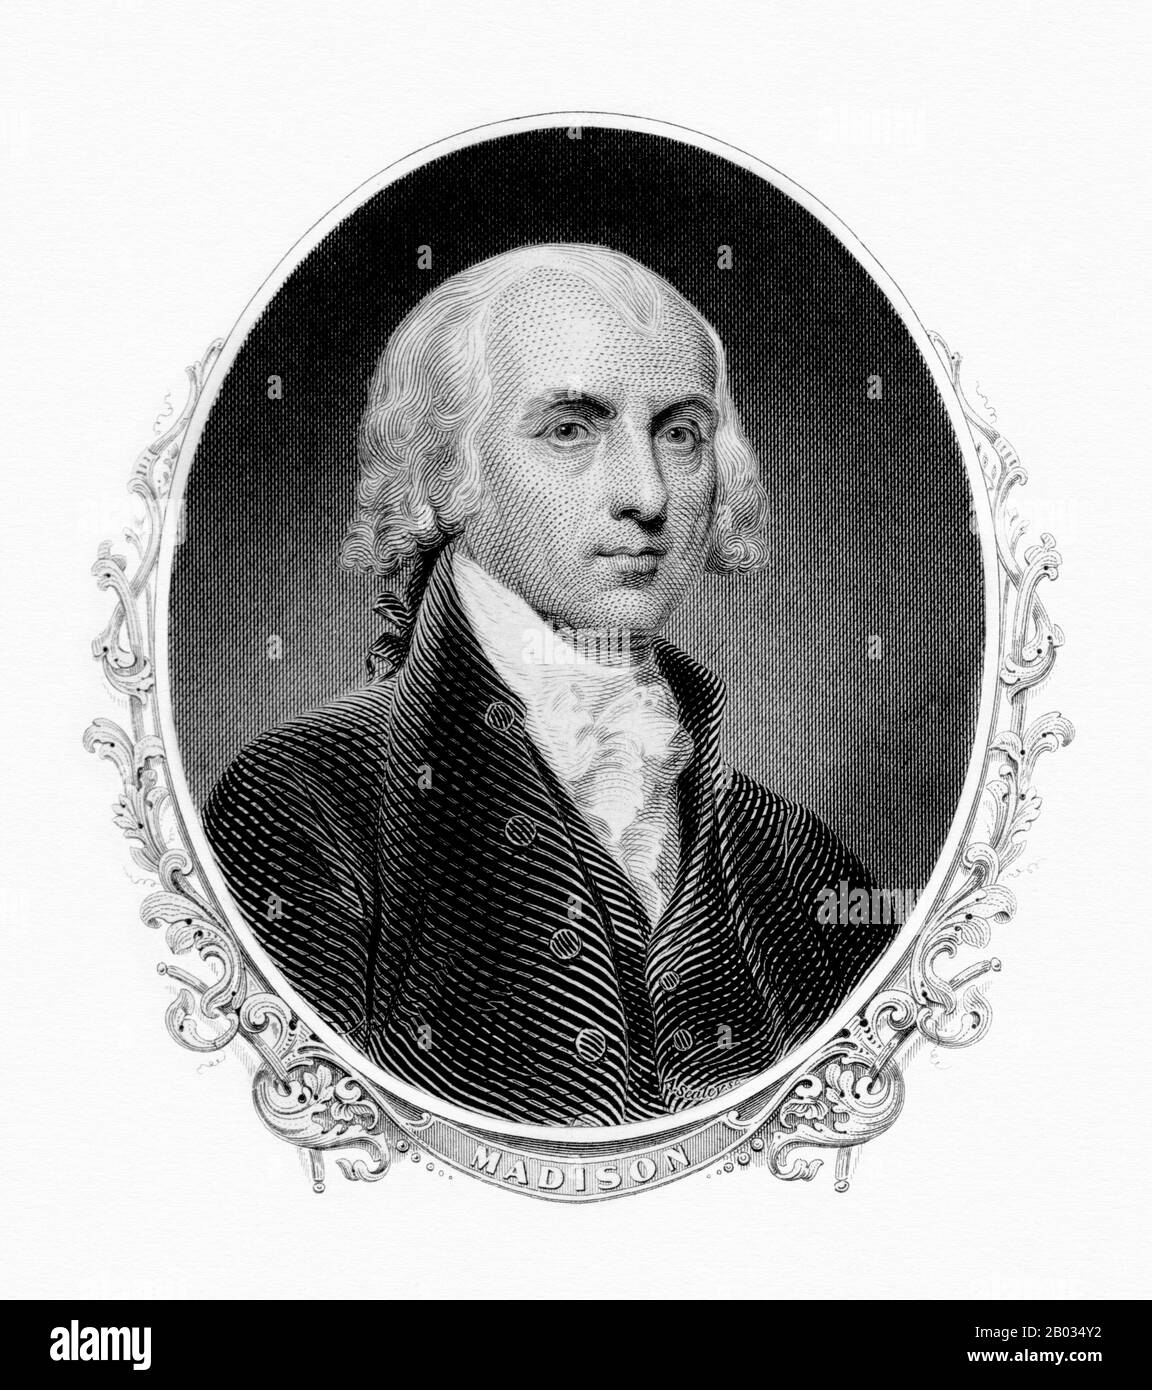 James Madison, Jr. (March 16, 1751 – June 28, 1836) was a political theorist, American statesman, and the fourth President of the United States (1809–17).  He is hailed as the 'Father of the Constitution' for his pivotal role in drafting and promoting the U.S. Constitution and the Bill of Rights. Stock Photo